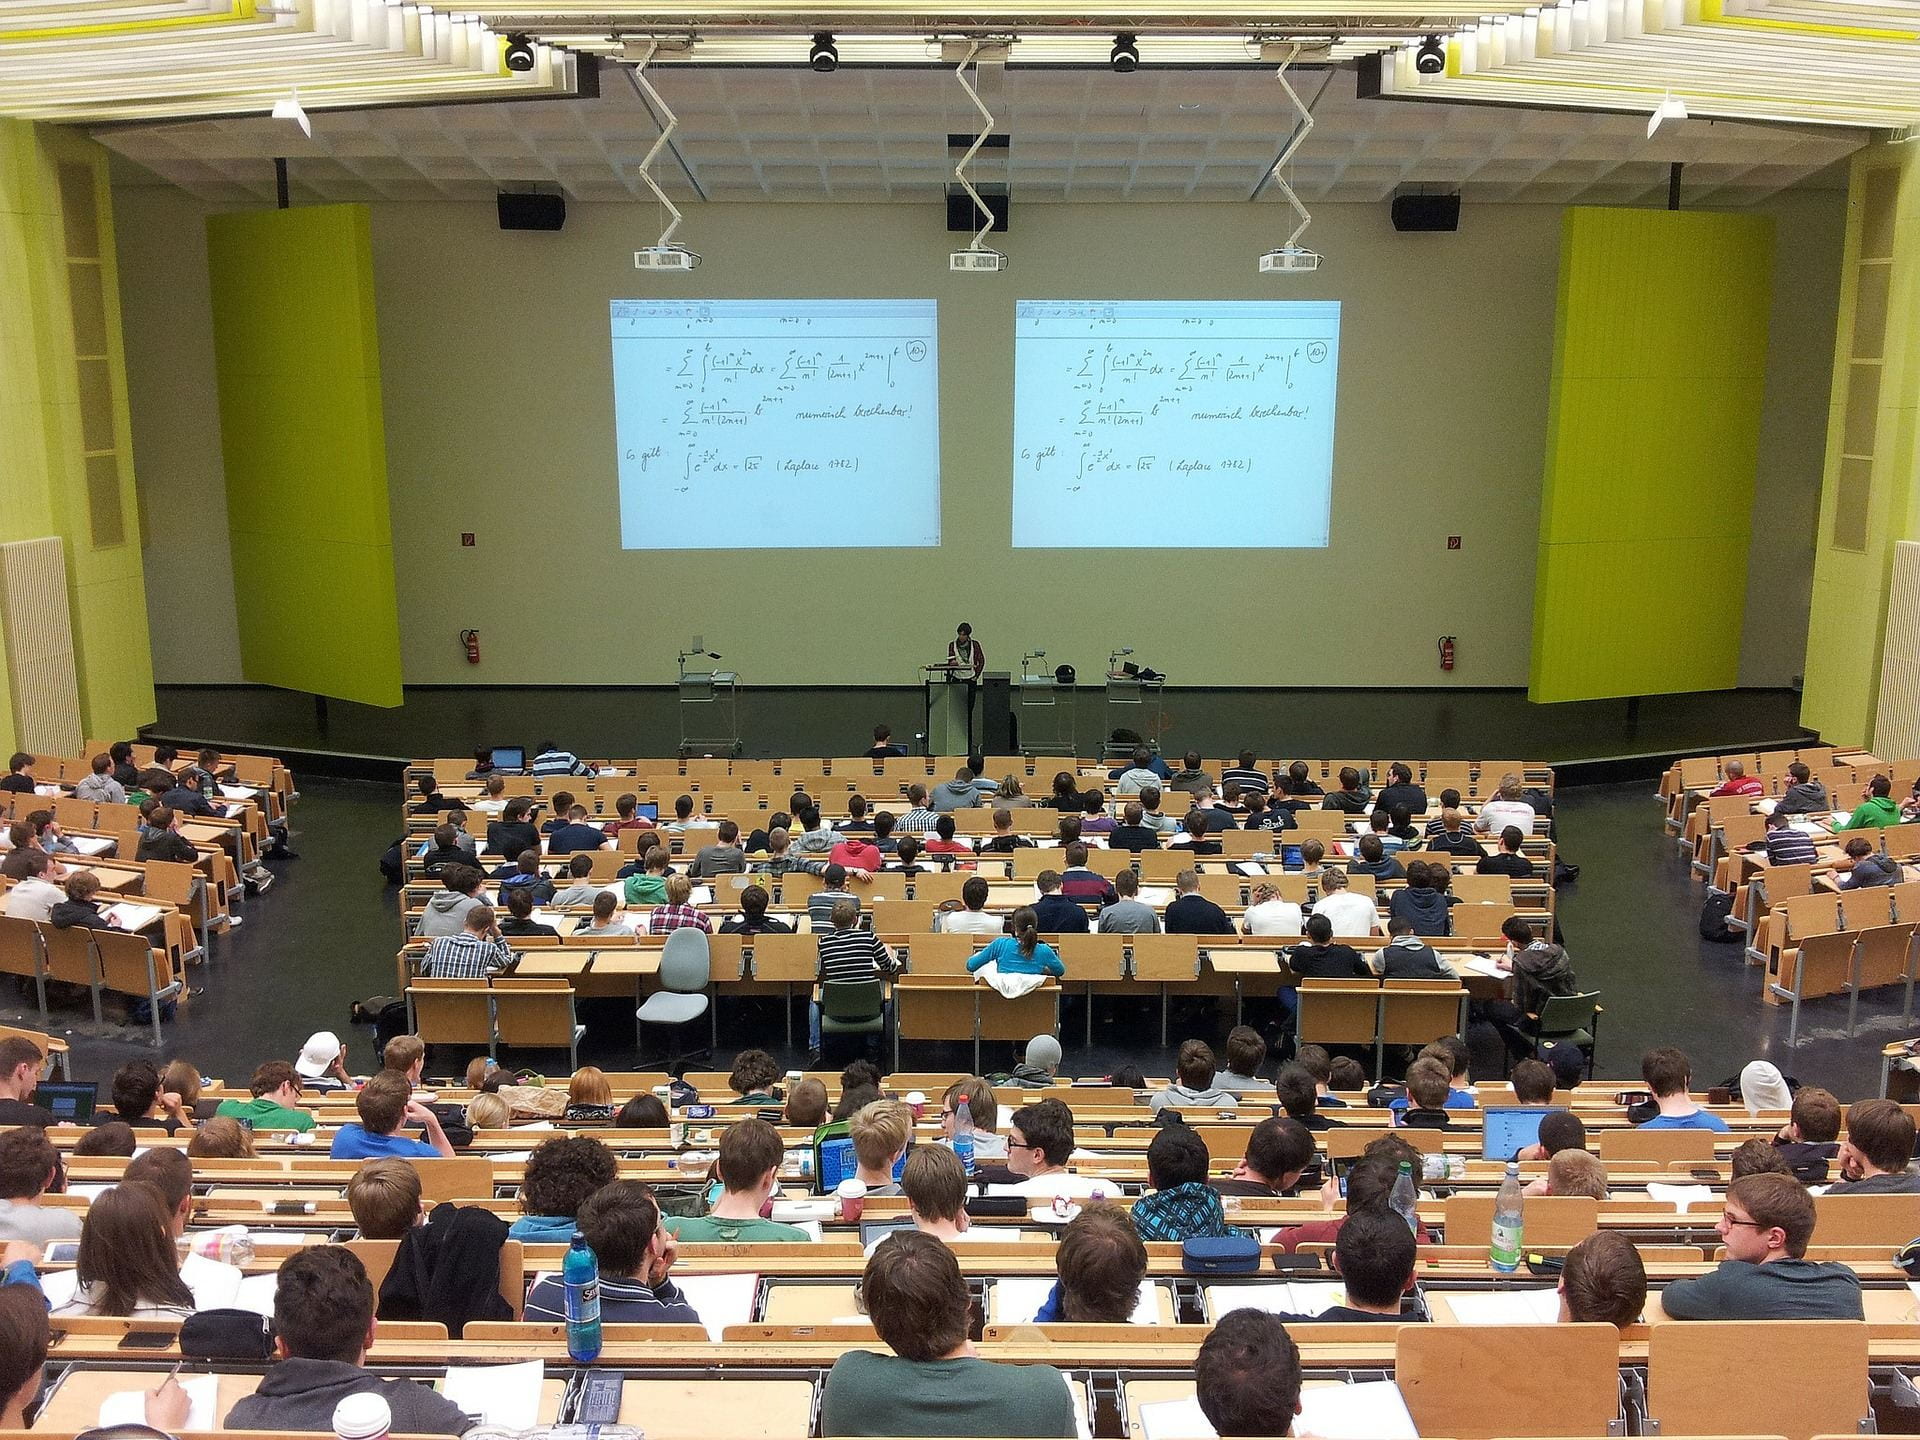 Pictured is a crowded university lecture hall, with students looking at math equations on the overhead projection and a single lecturer at the front of the room